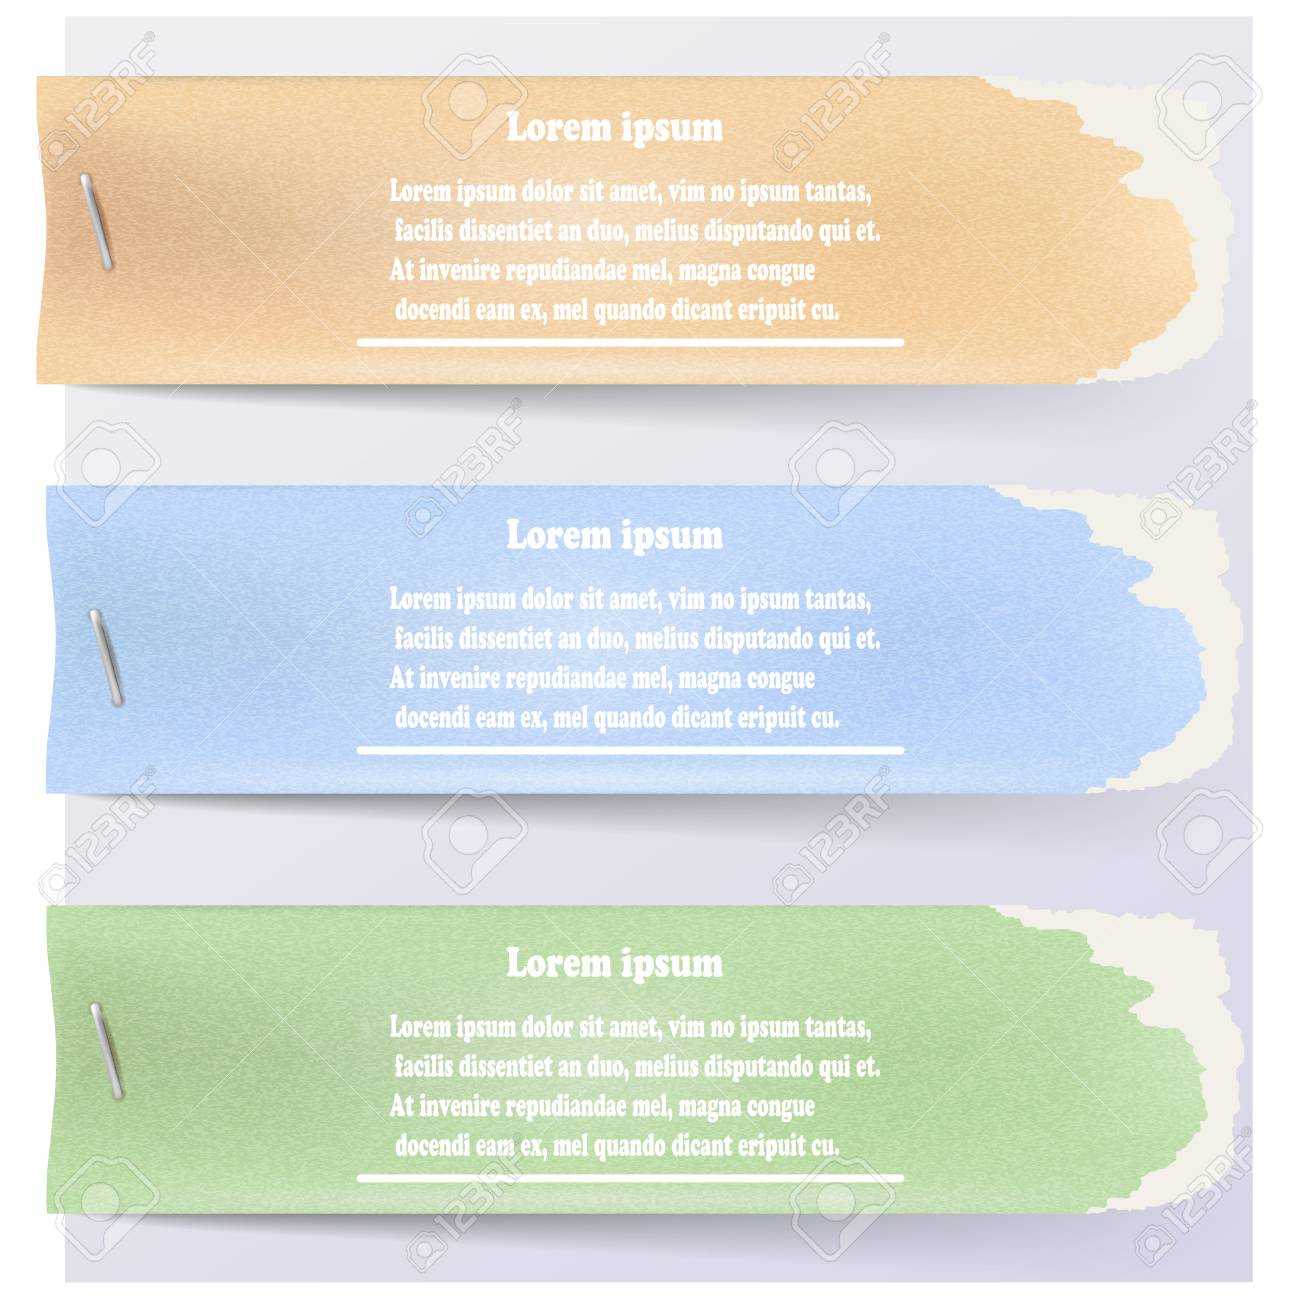 Abstract Color Paper Banners For Infographic Staples. Vector.. Intended For Staples Banner Template